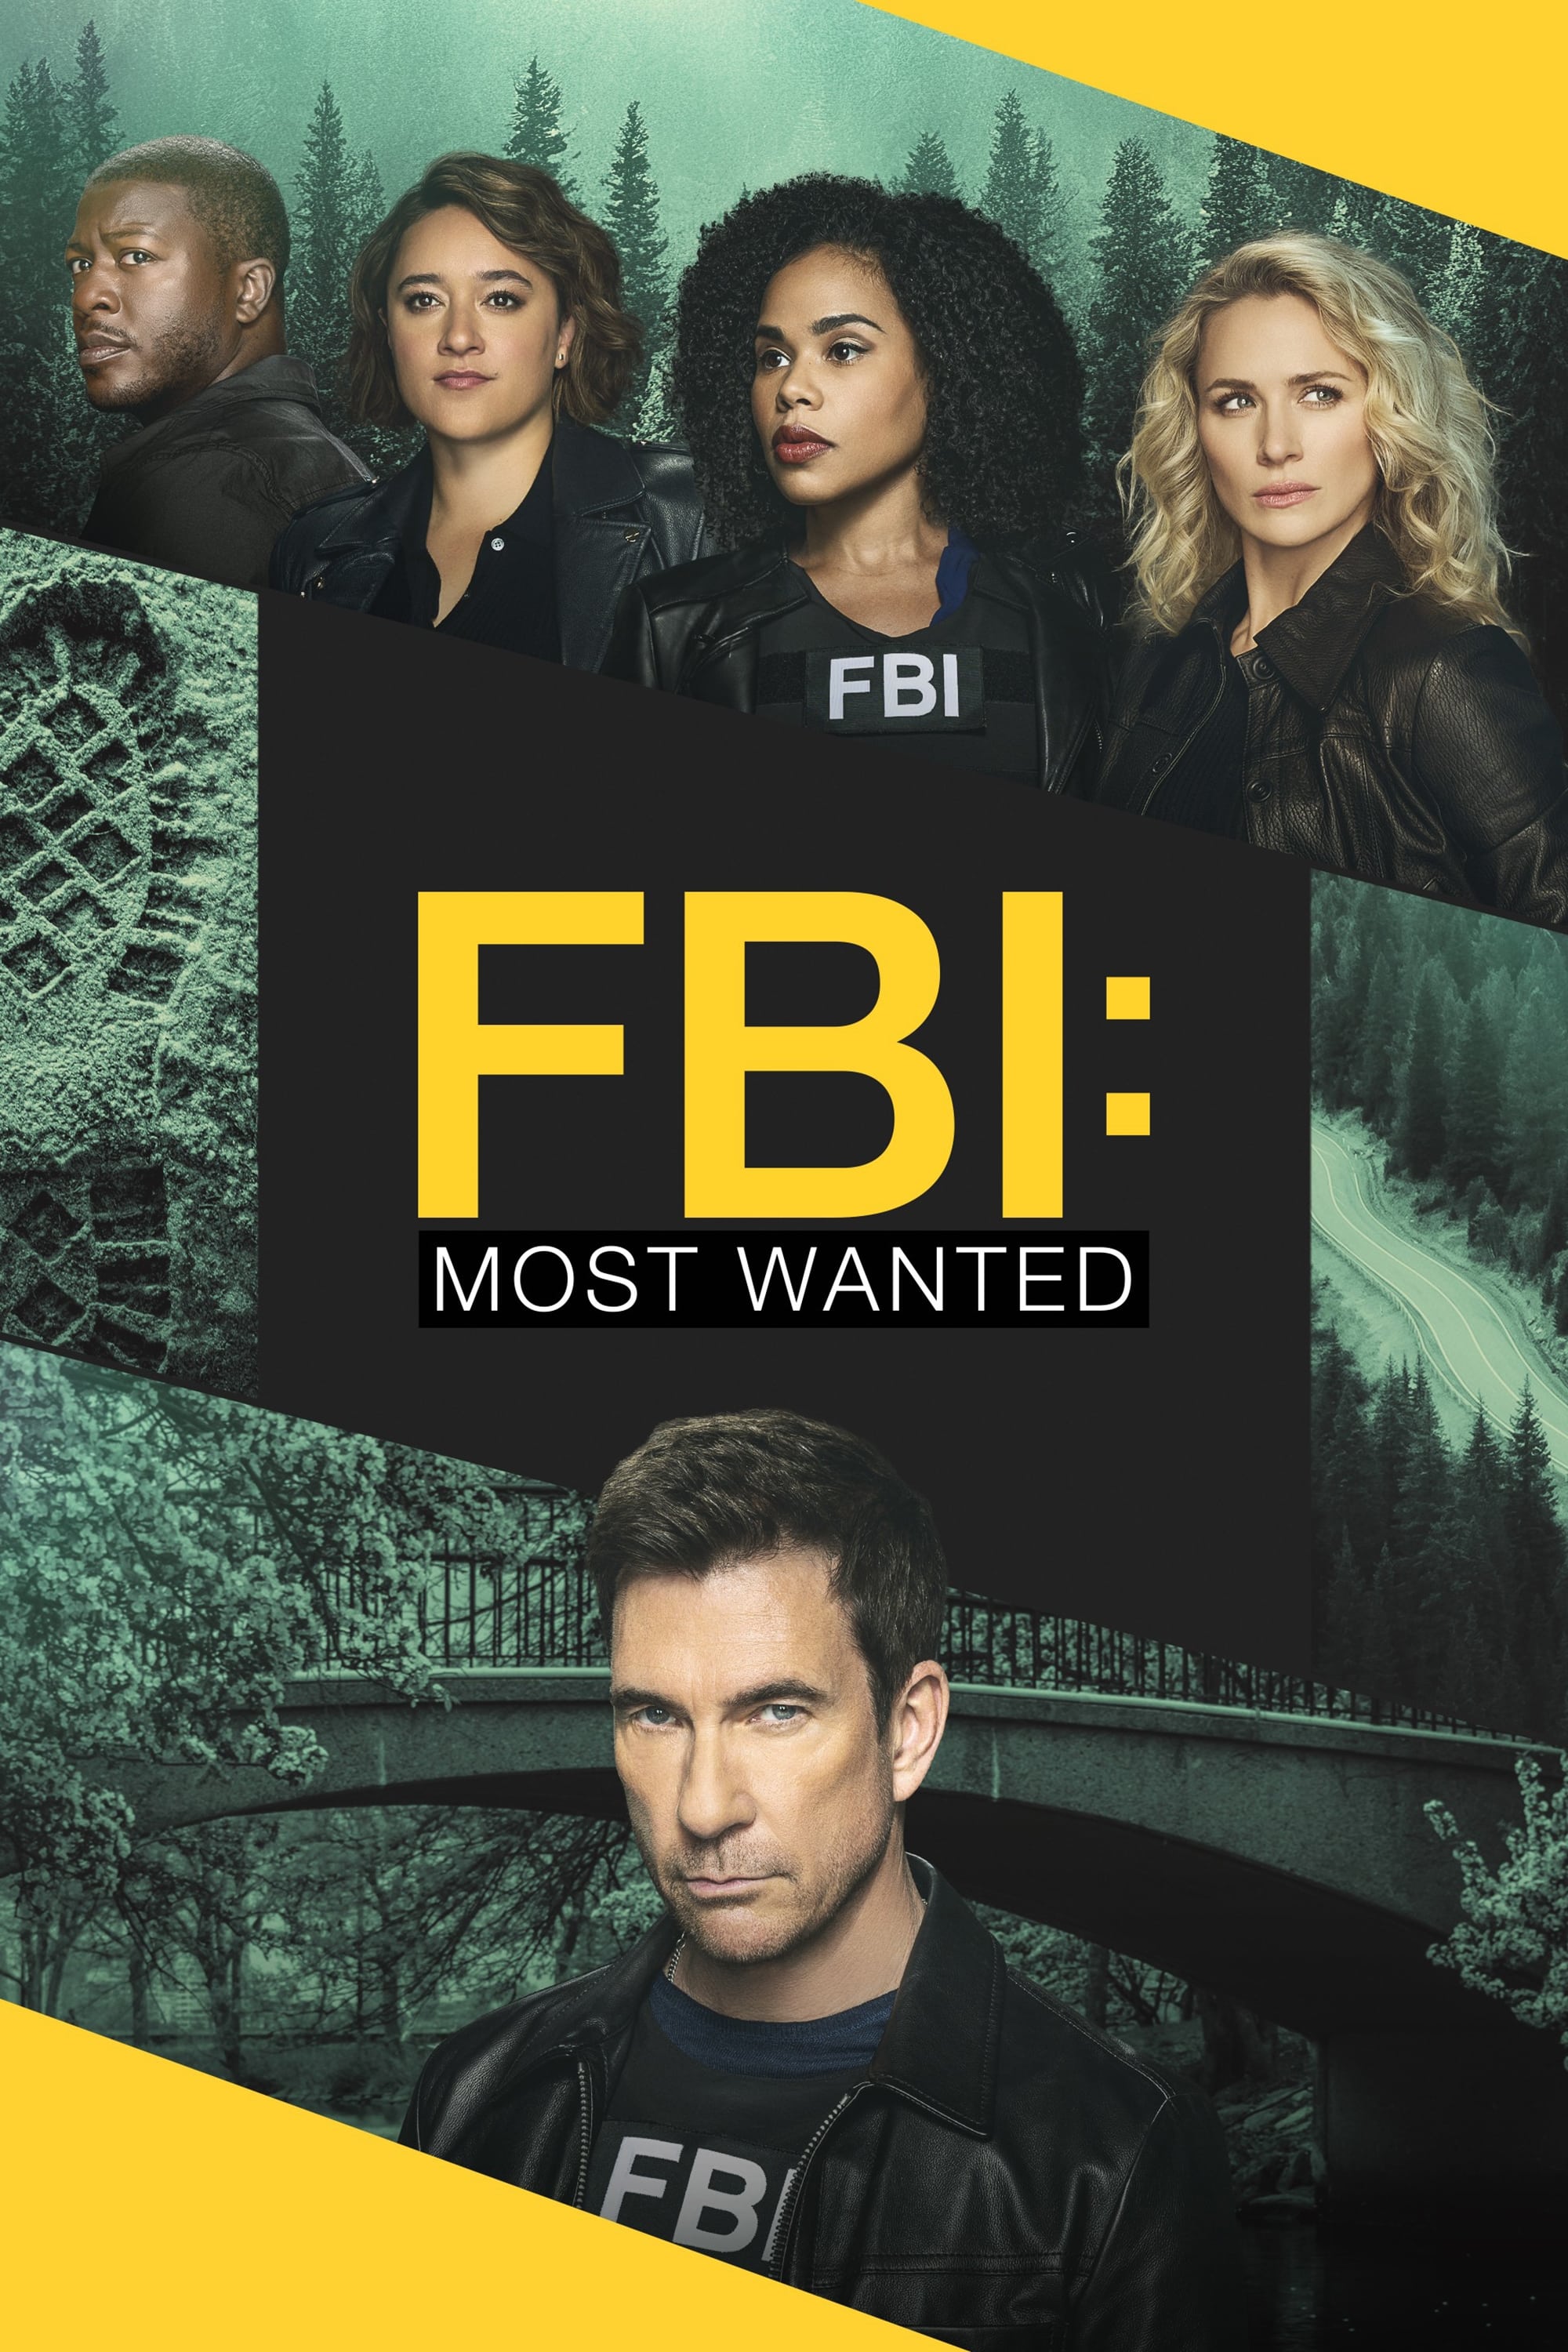 FBI - Most Wanted